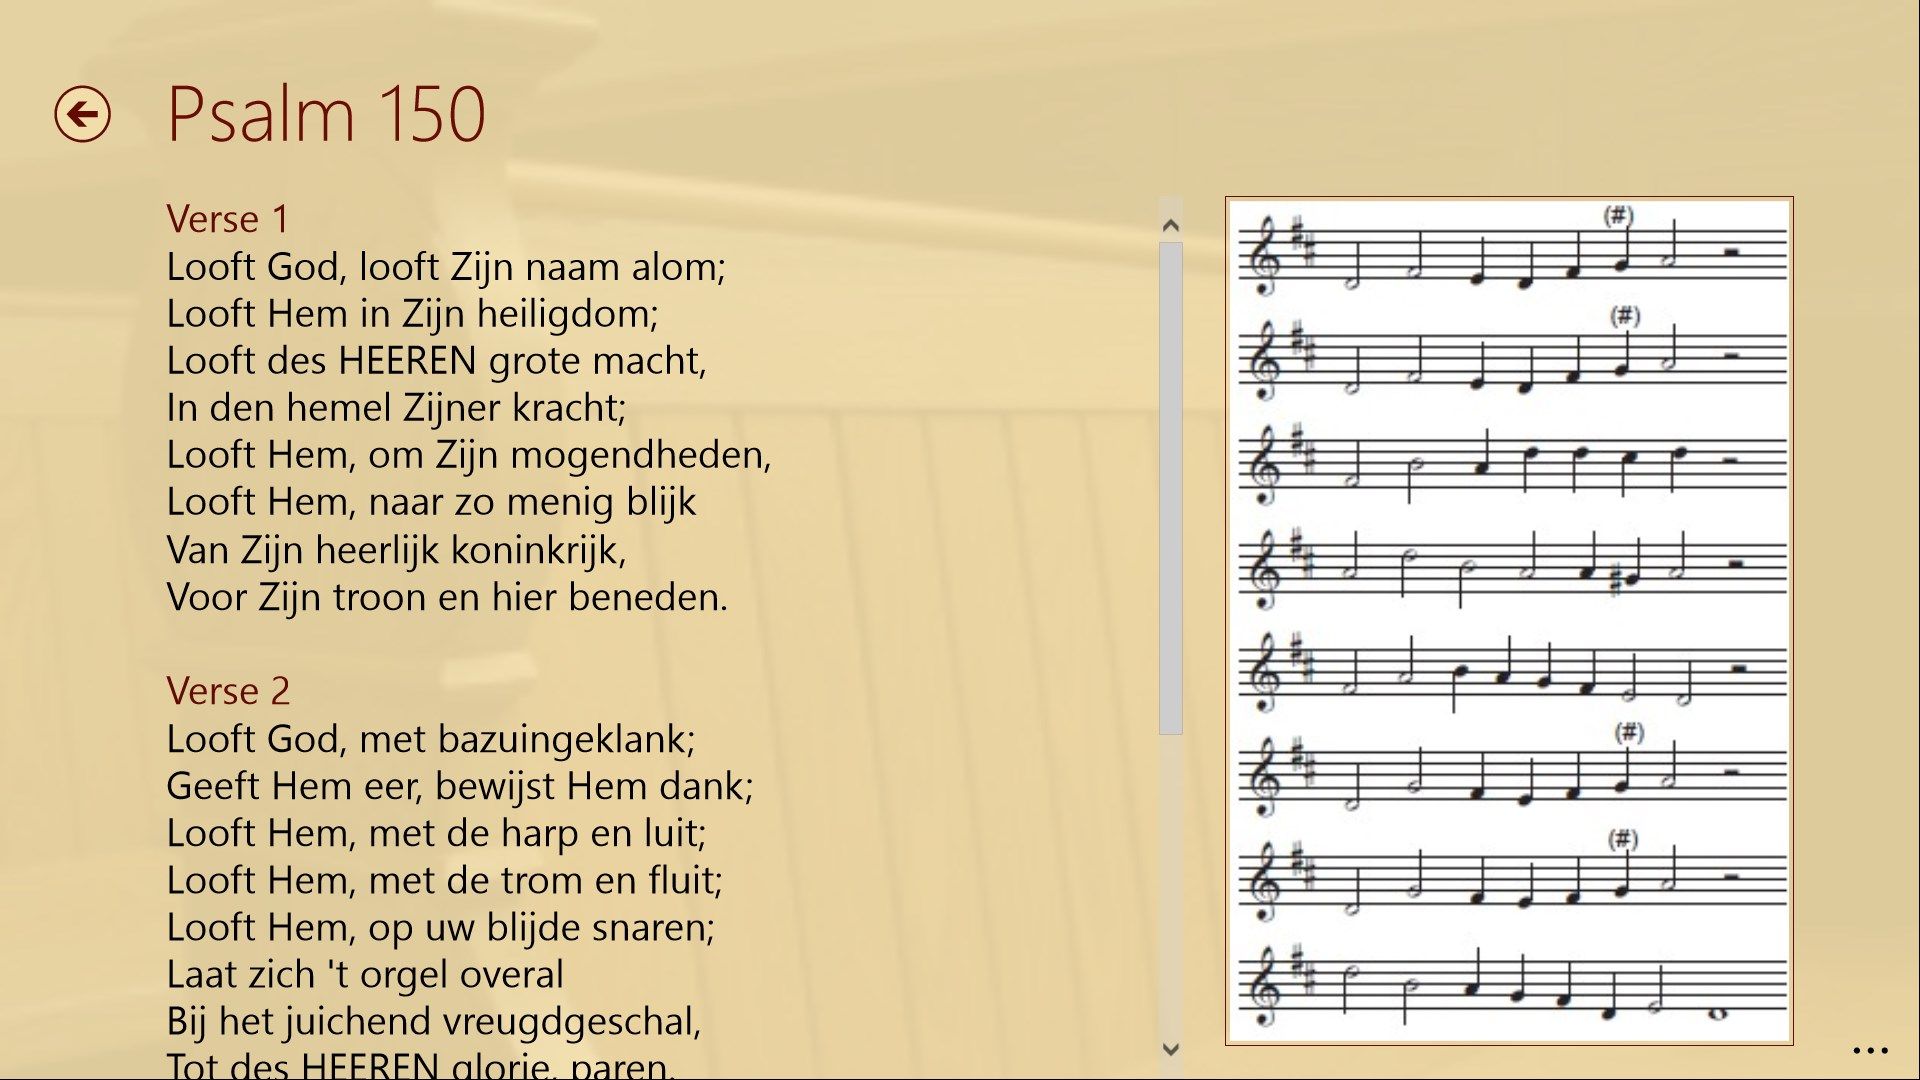 Psalm text and music score